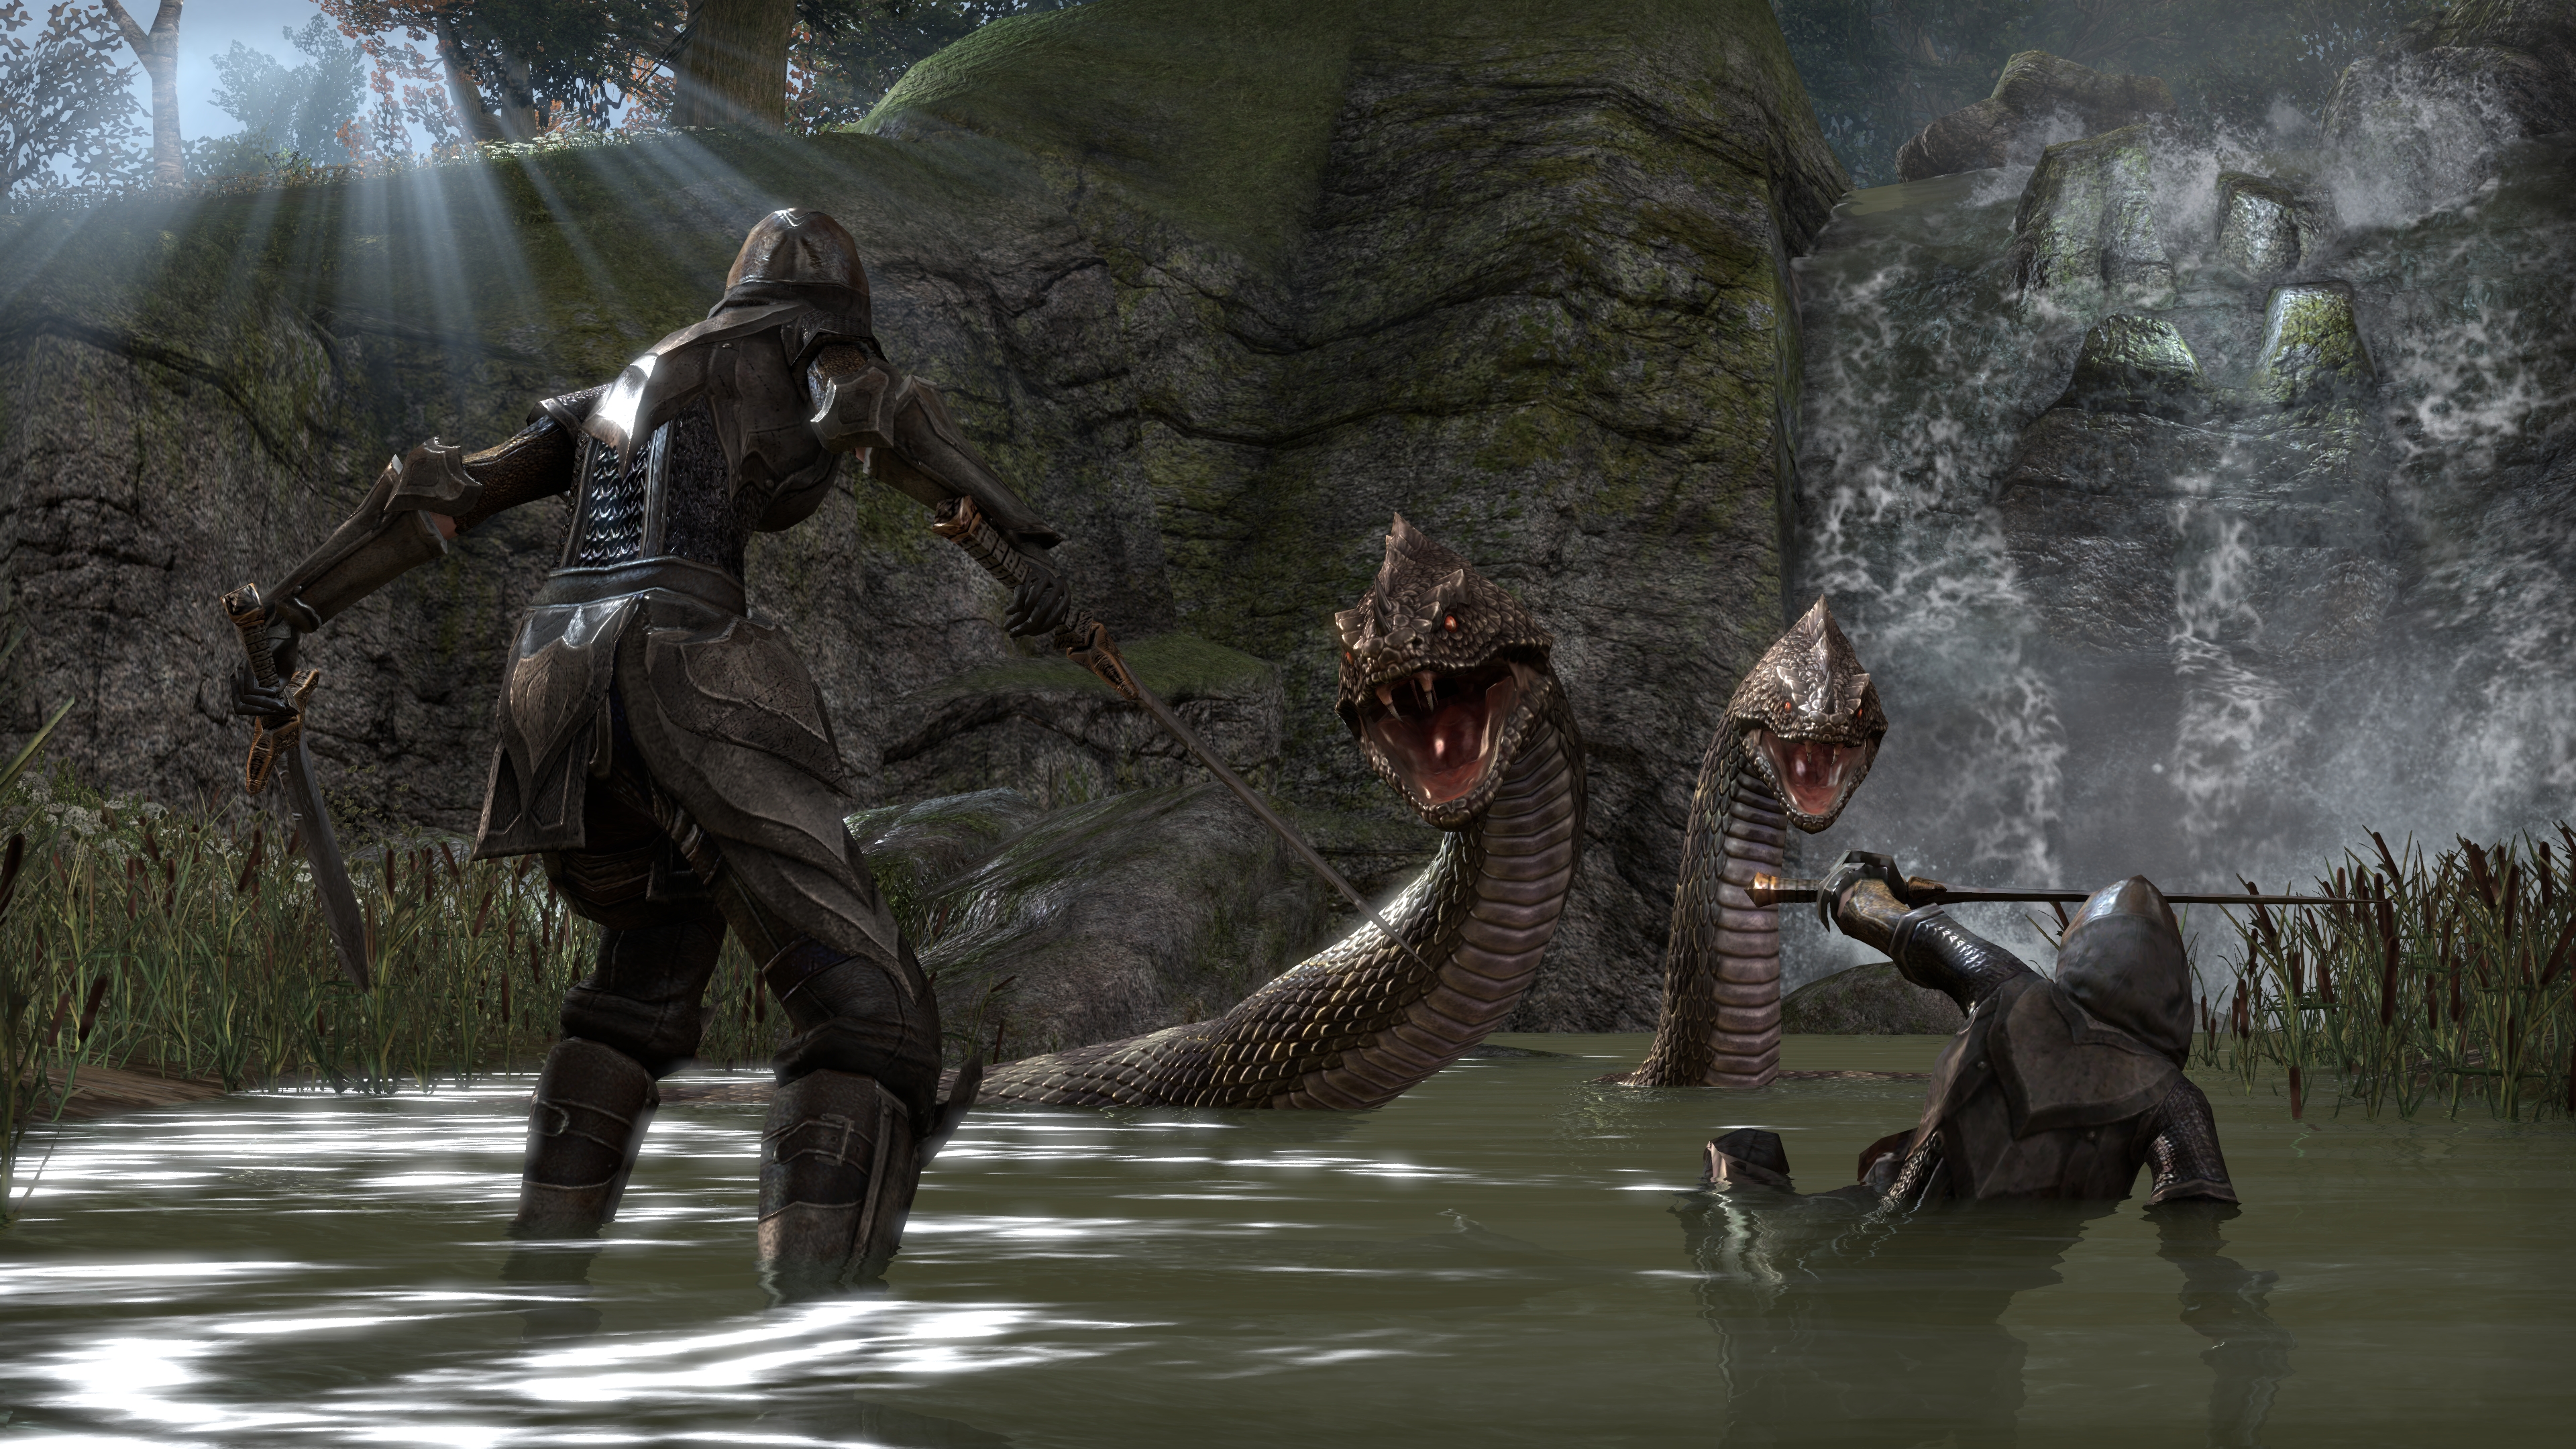 Next TESO Update Might Include Scaling Dungeons